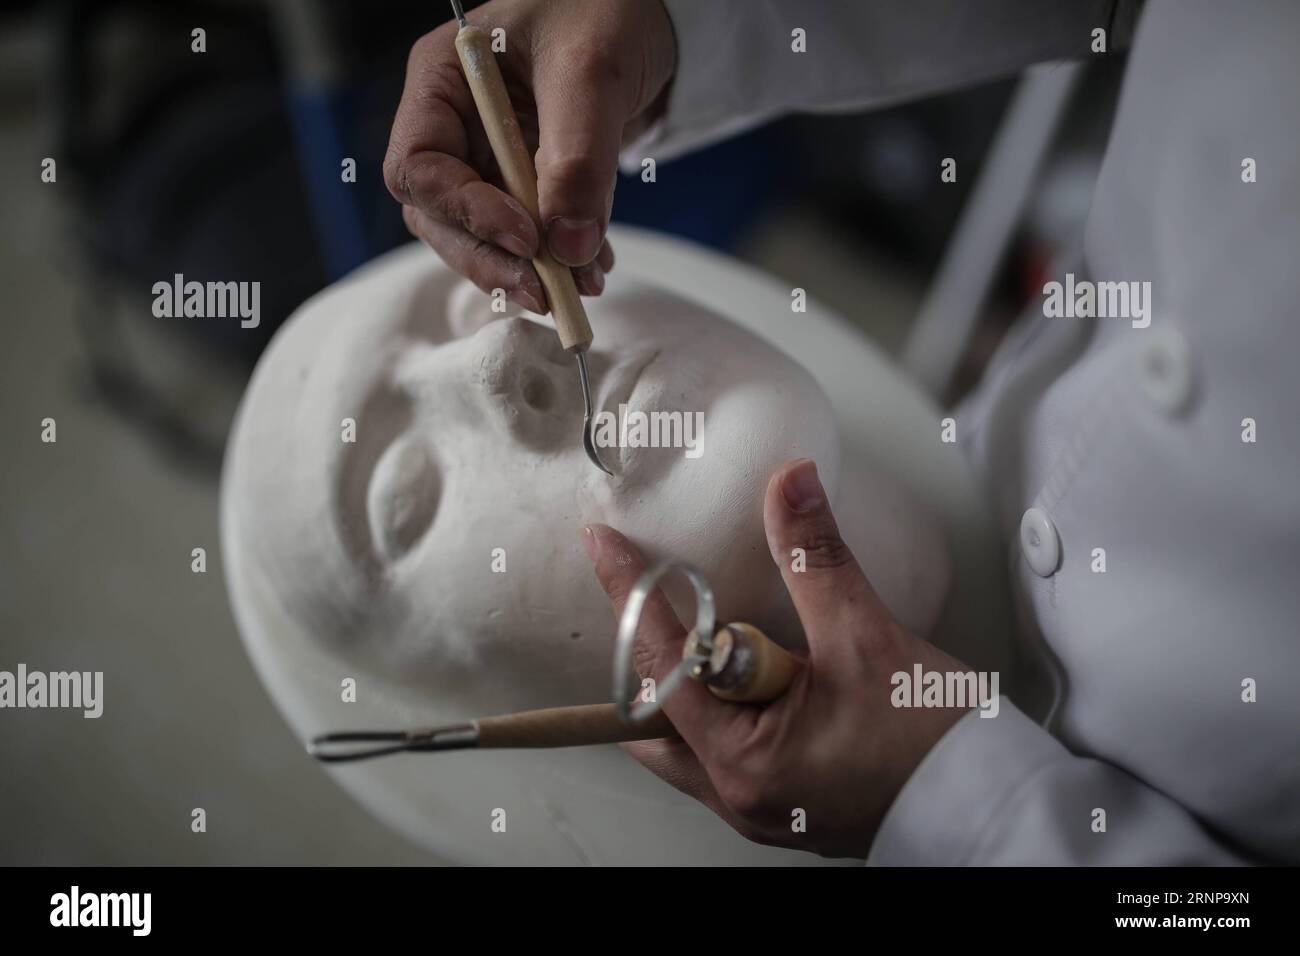 (170818) -- BOGOTA, Aug. 18, 2017 -- Doctor Yinna Martinez works on the plaster cast of a face at the Burn Unit of the Simon Bolivar Hospital in Bogota, capital of Colombia, on Aug. 17, 2017. According to local press, Martinez leads a project of special transparent masks for people who have suffered deep second degree burns in the face, as well as other plastic elements for various body parts. Jhon Paz) (da) (fnc)(gj) COLOMBIA-BOGOTA-HEALTH-EVENT e Jhonpaz PUBLICATIONxNOTxINxCHN   Bogota Aug 18 2017 Doctor  Martinez Works ON The Plaster Cast of a Face AT The Burn Unit of The Simon Bolivar Hosp Stock Photo